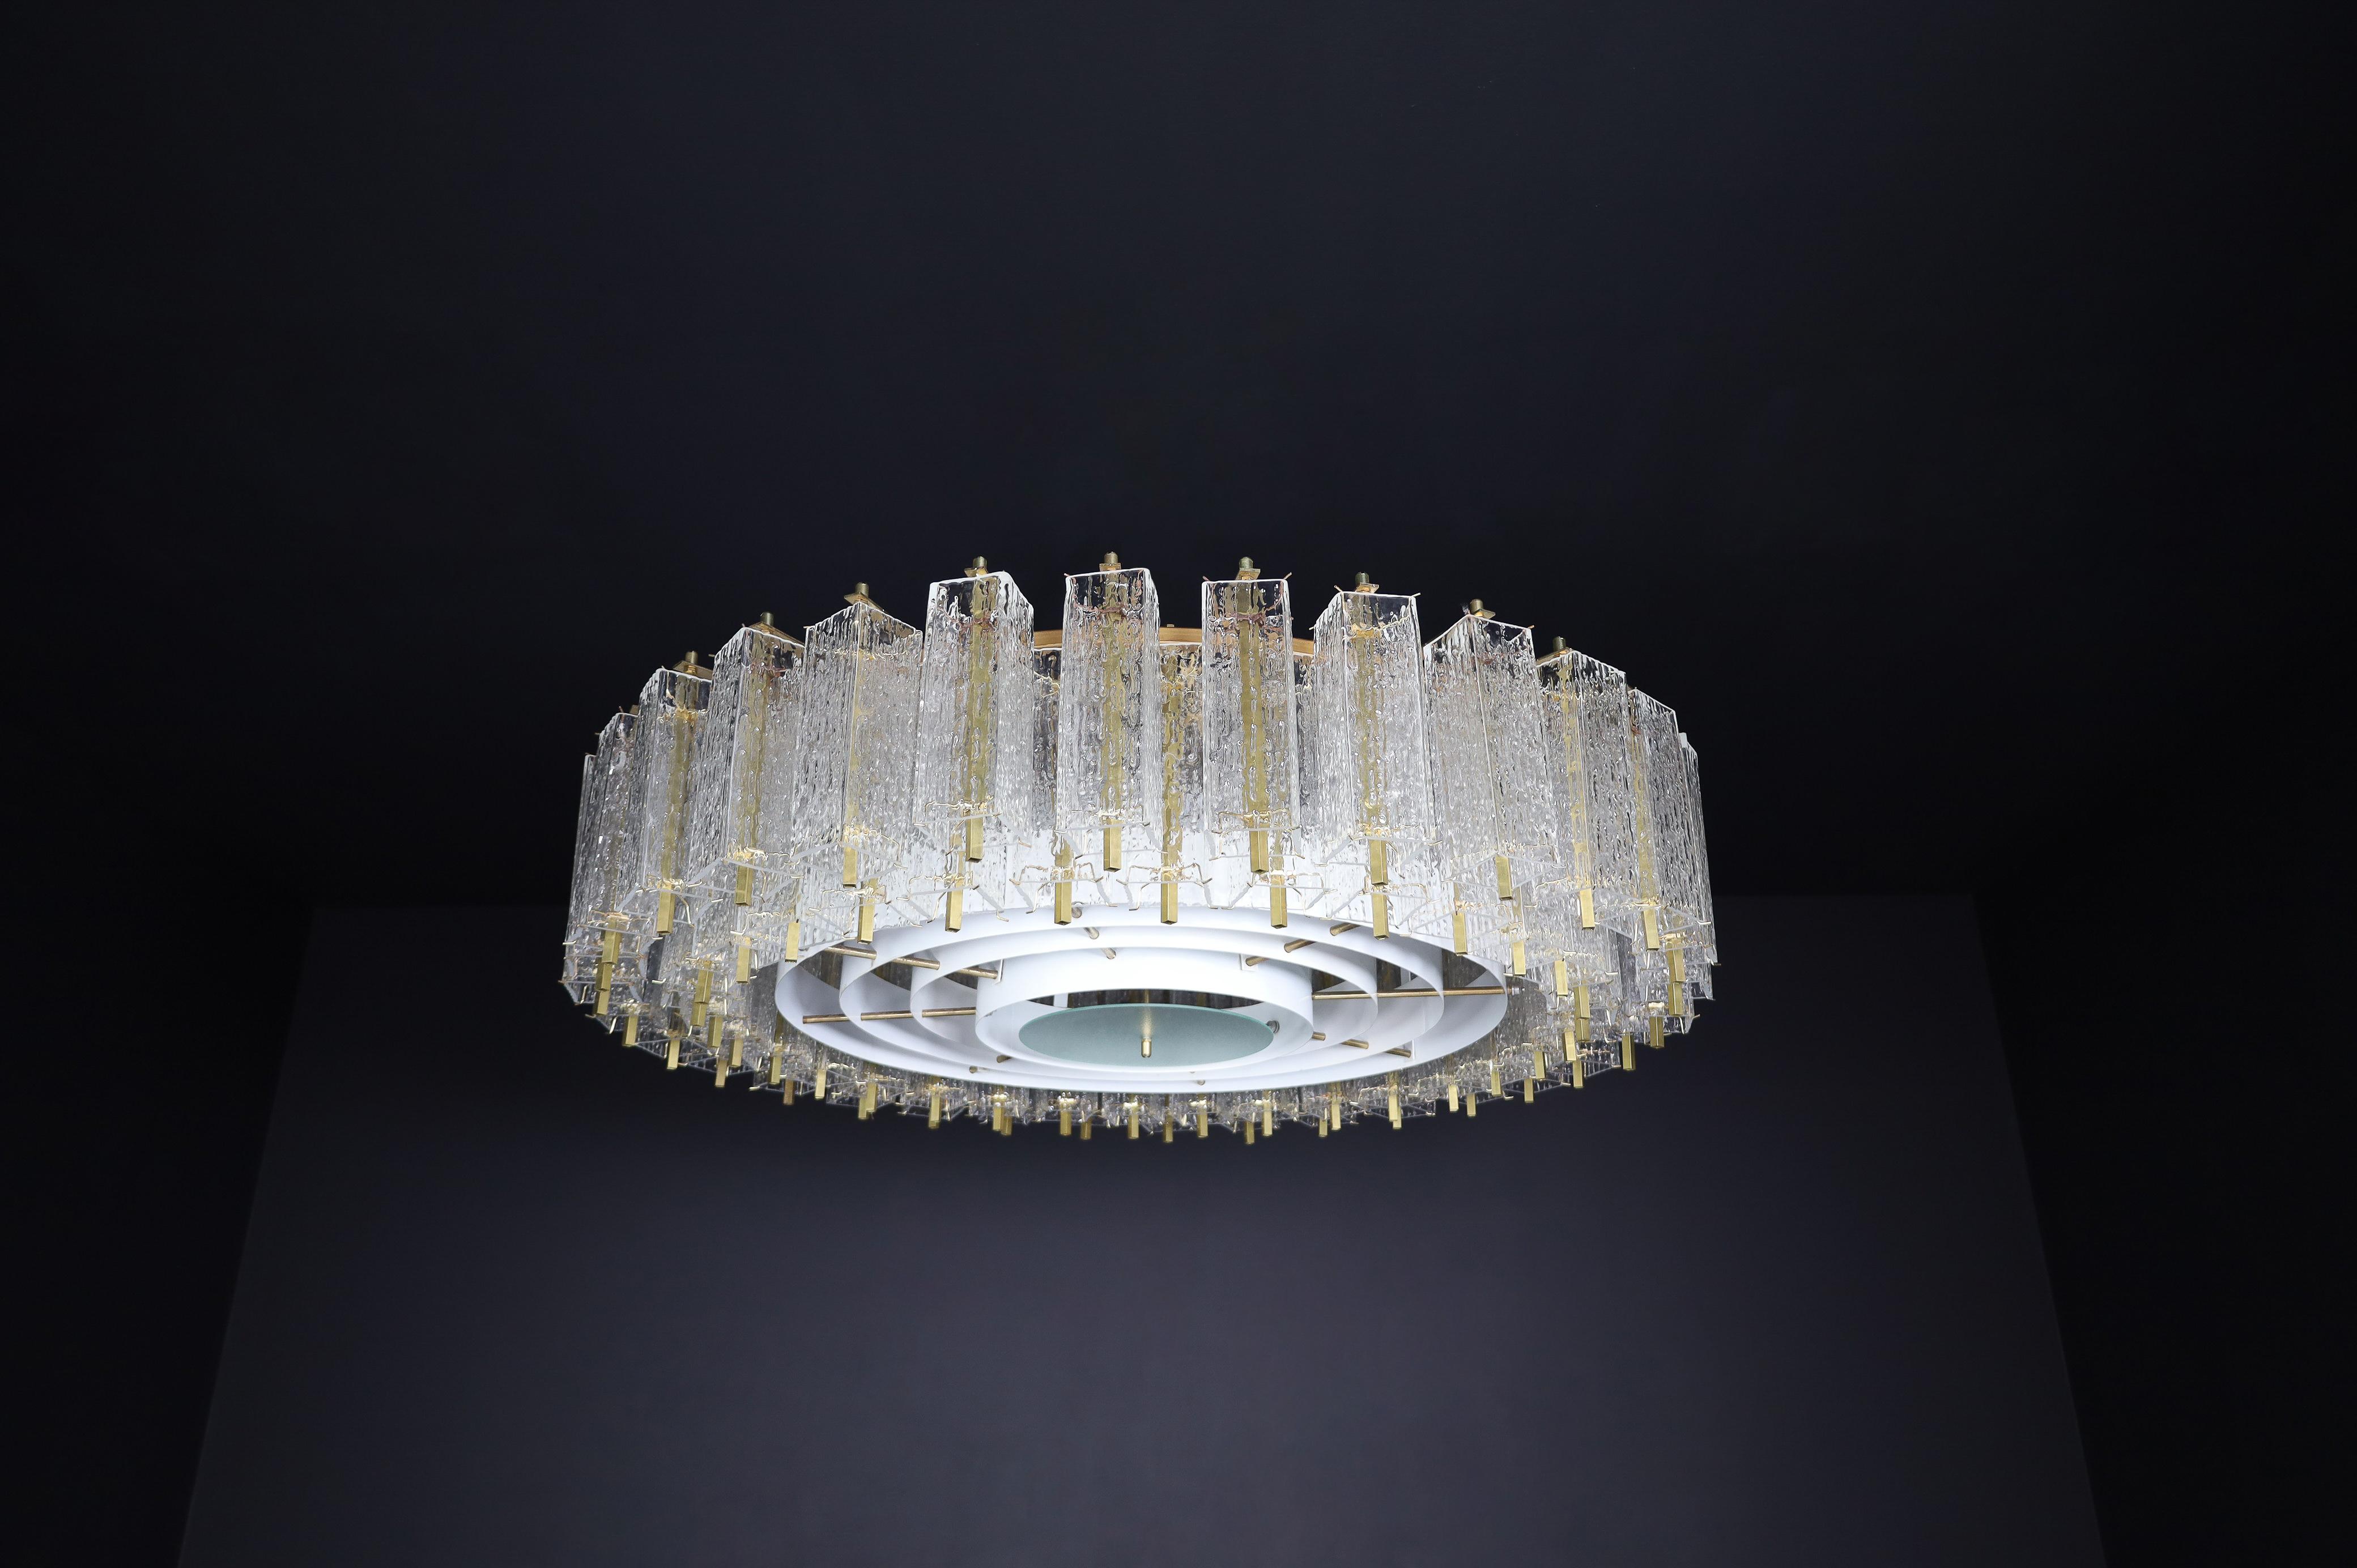 Large Midcentury Chandelier in Structured Glass and Brass, Europe 1960s For Sale 5